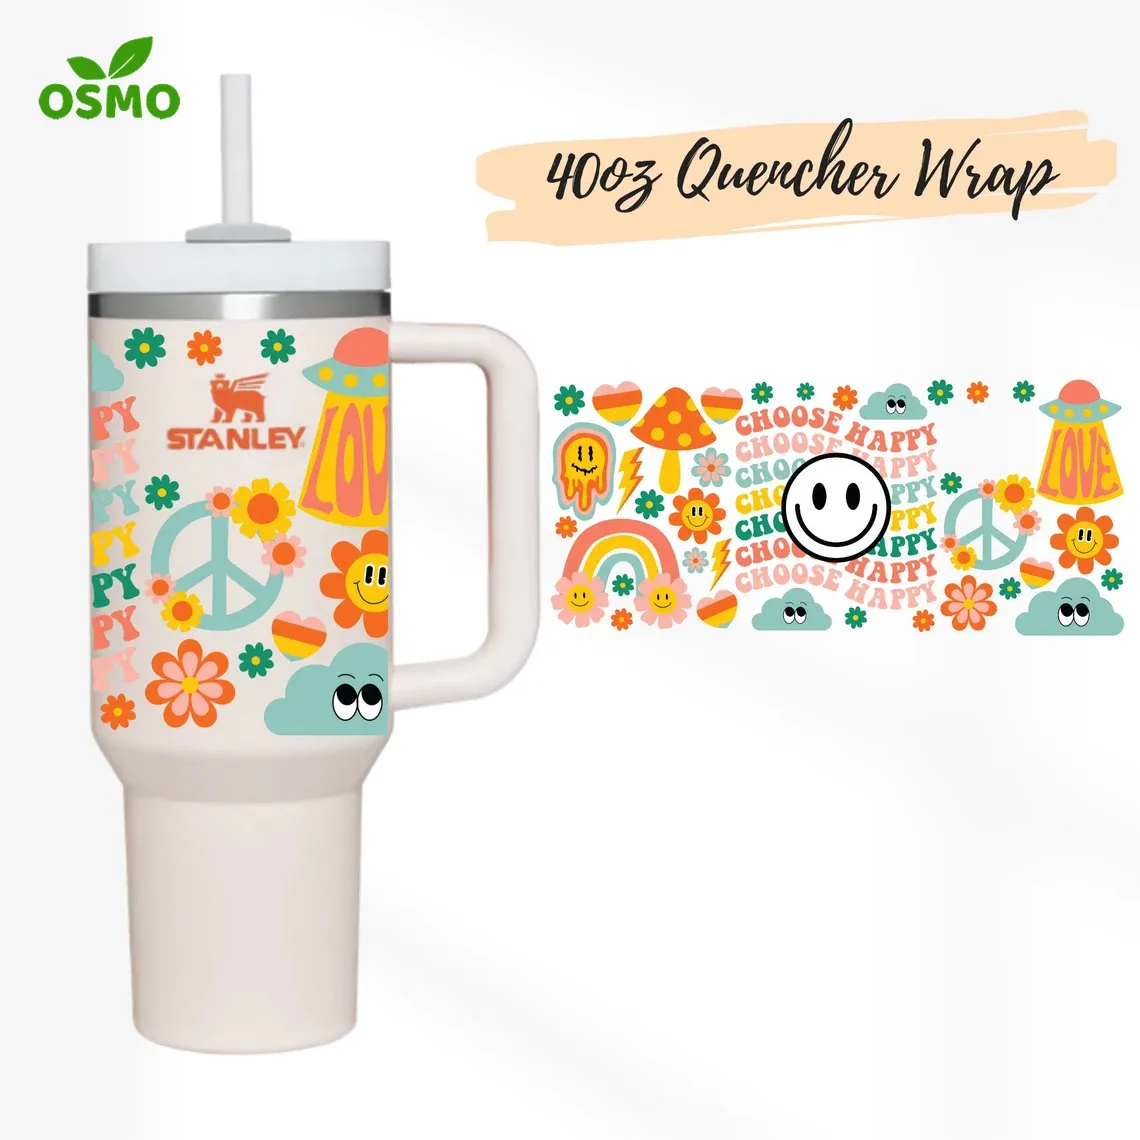 Osmo Wholesale UV Dtf Transfer Wraps 40oz Quencher Stanley Tumbler Wrap Happiness Affirmations Self Love Flower Wraps